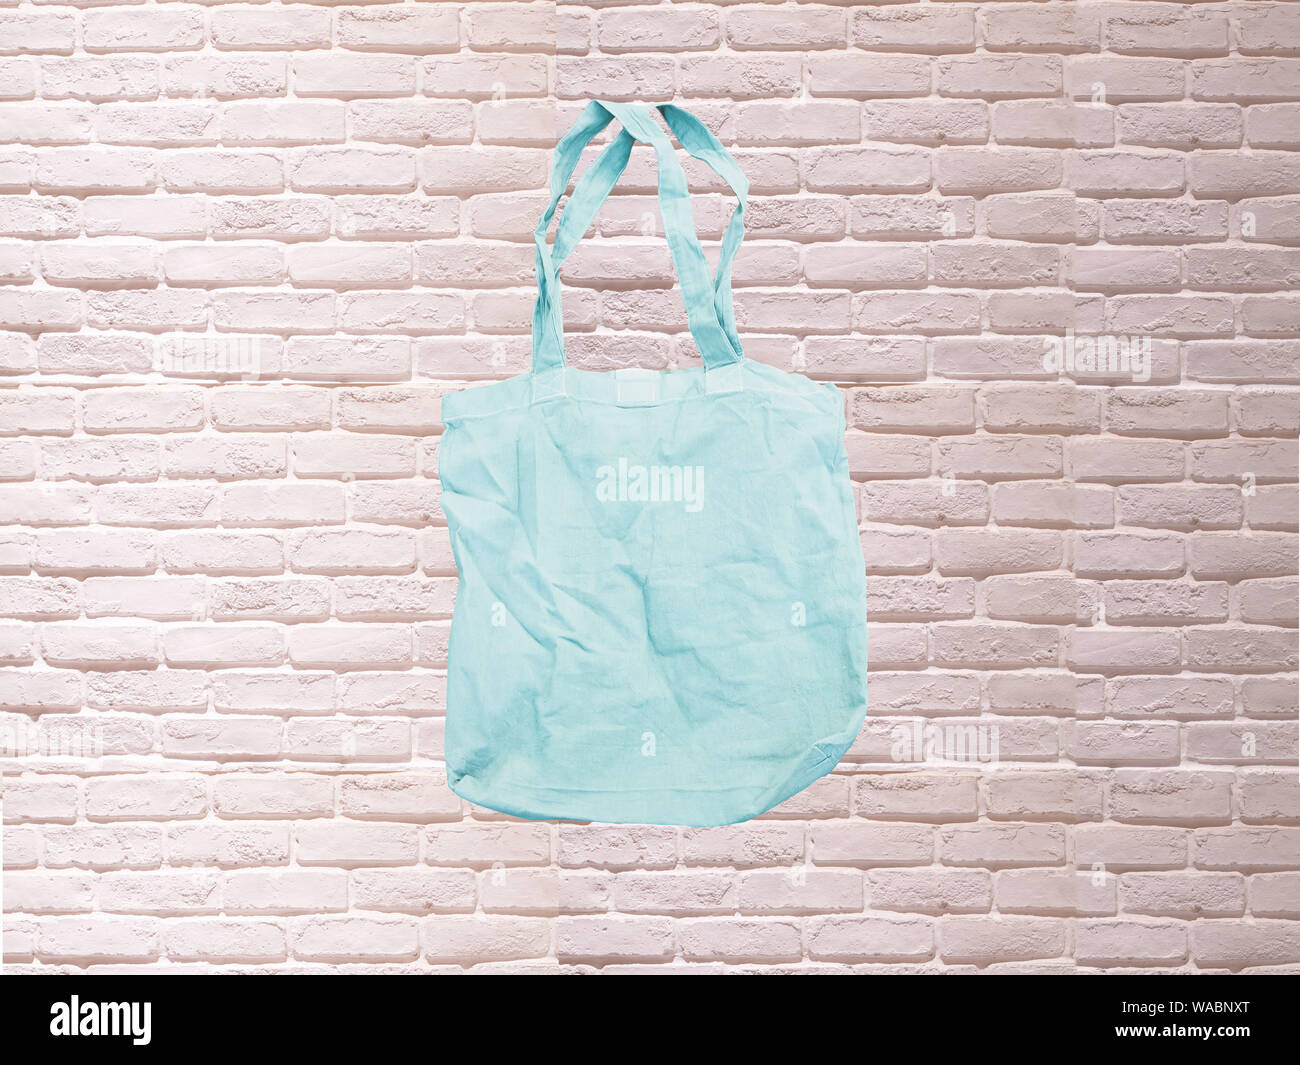 https://c8.alamy.com/comp/WABNXT/mock-up-tote-bag-eco-hipster-white-cotton-fabric-shopping-bag-in-blue-white-brick-eall-rustic-background-WABNXT.jpg